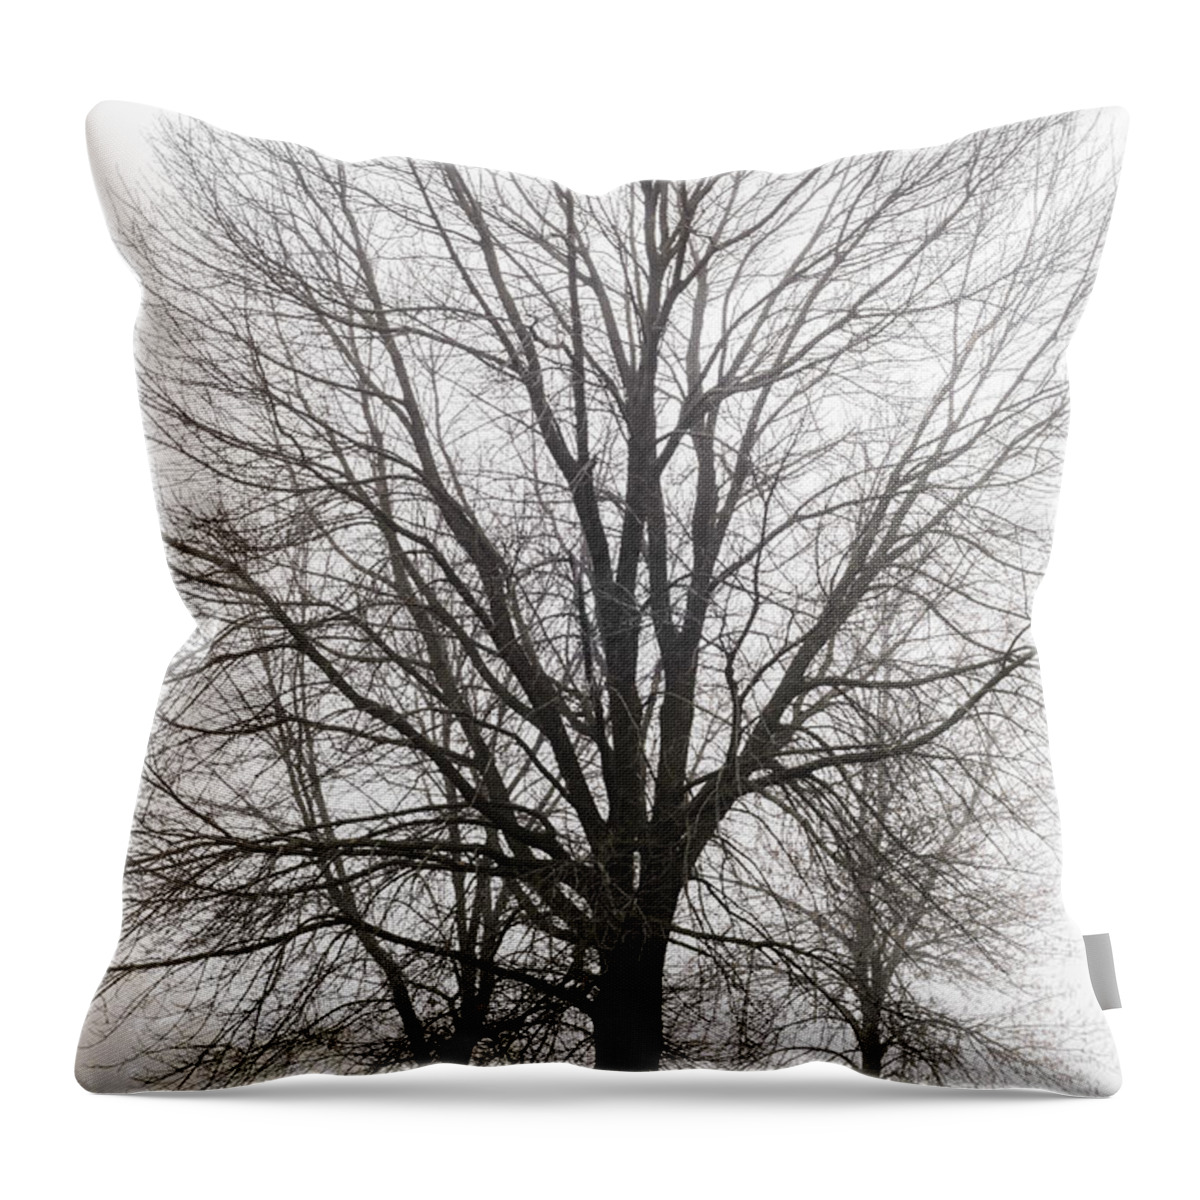 Trees Throw Pillow featuring the photograph Three Trees In Fog by Tamara Becker